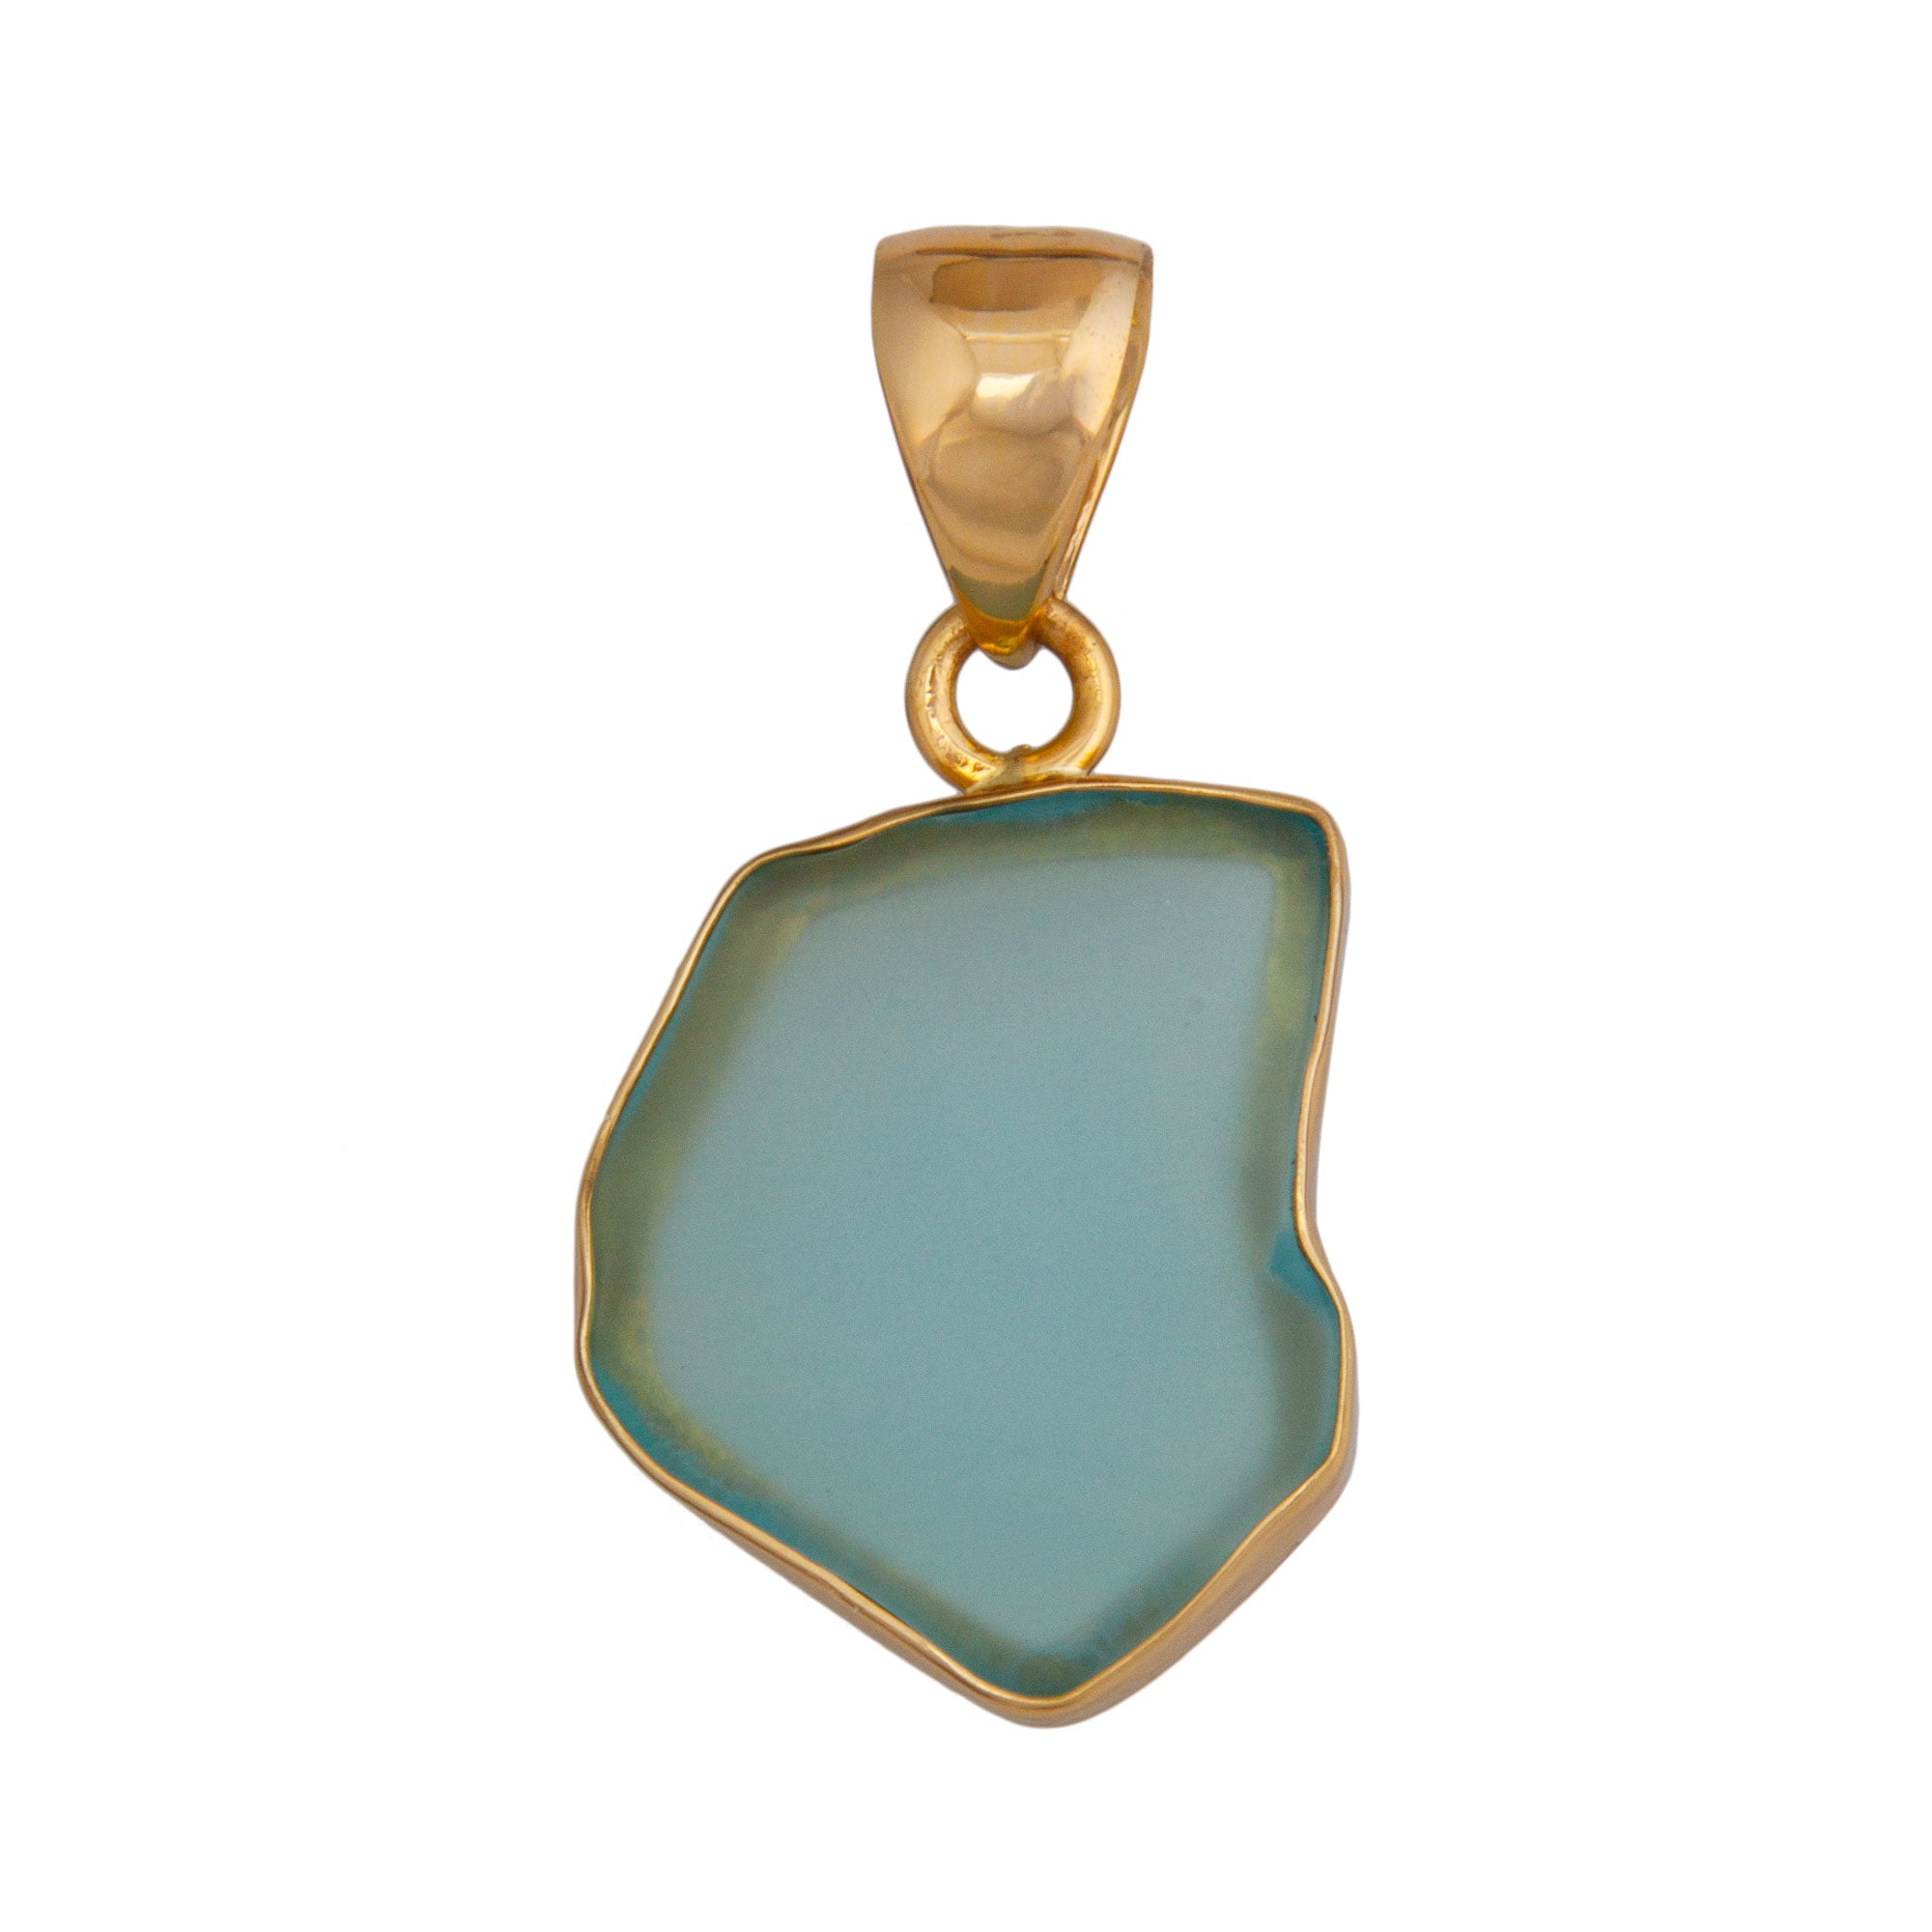 Charles Albert Jewelry - Alchemia Aqua Recycled Glass Pendant - Front View